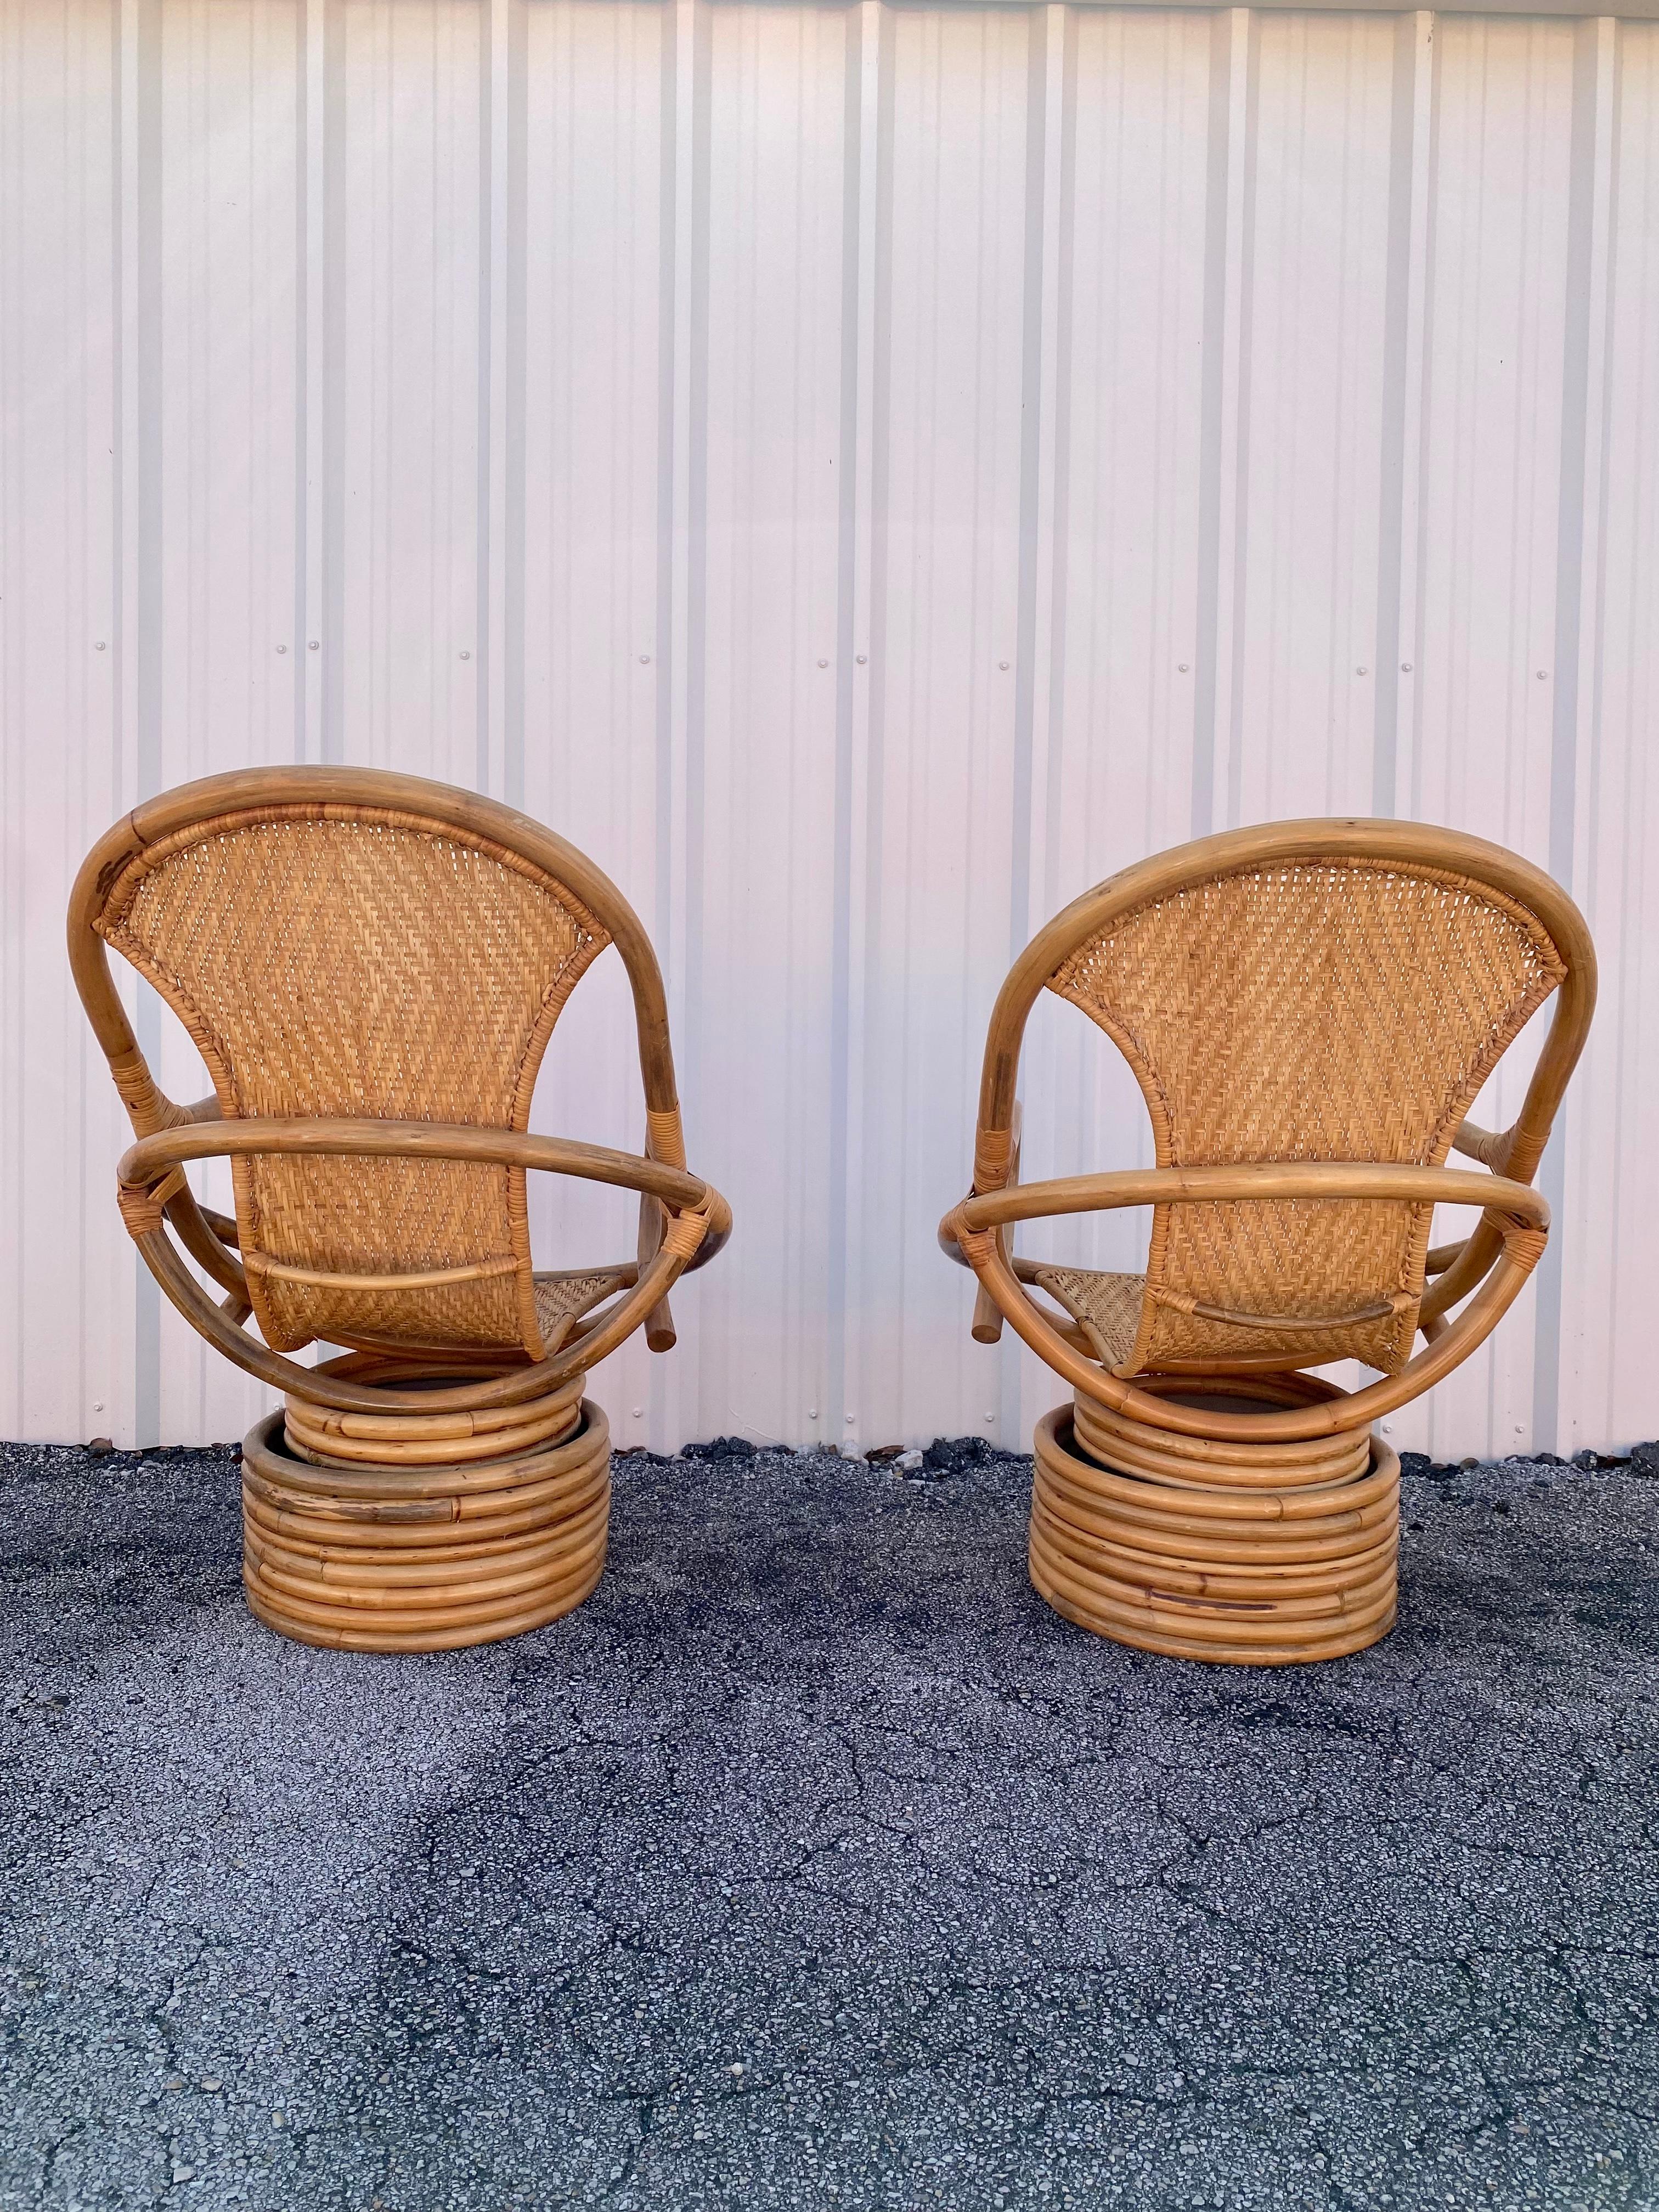 Philippine 1980s Rattan Coastal Sculptural Swivel Chairs, set of 2 For Sale